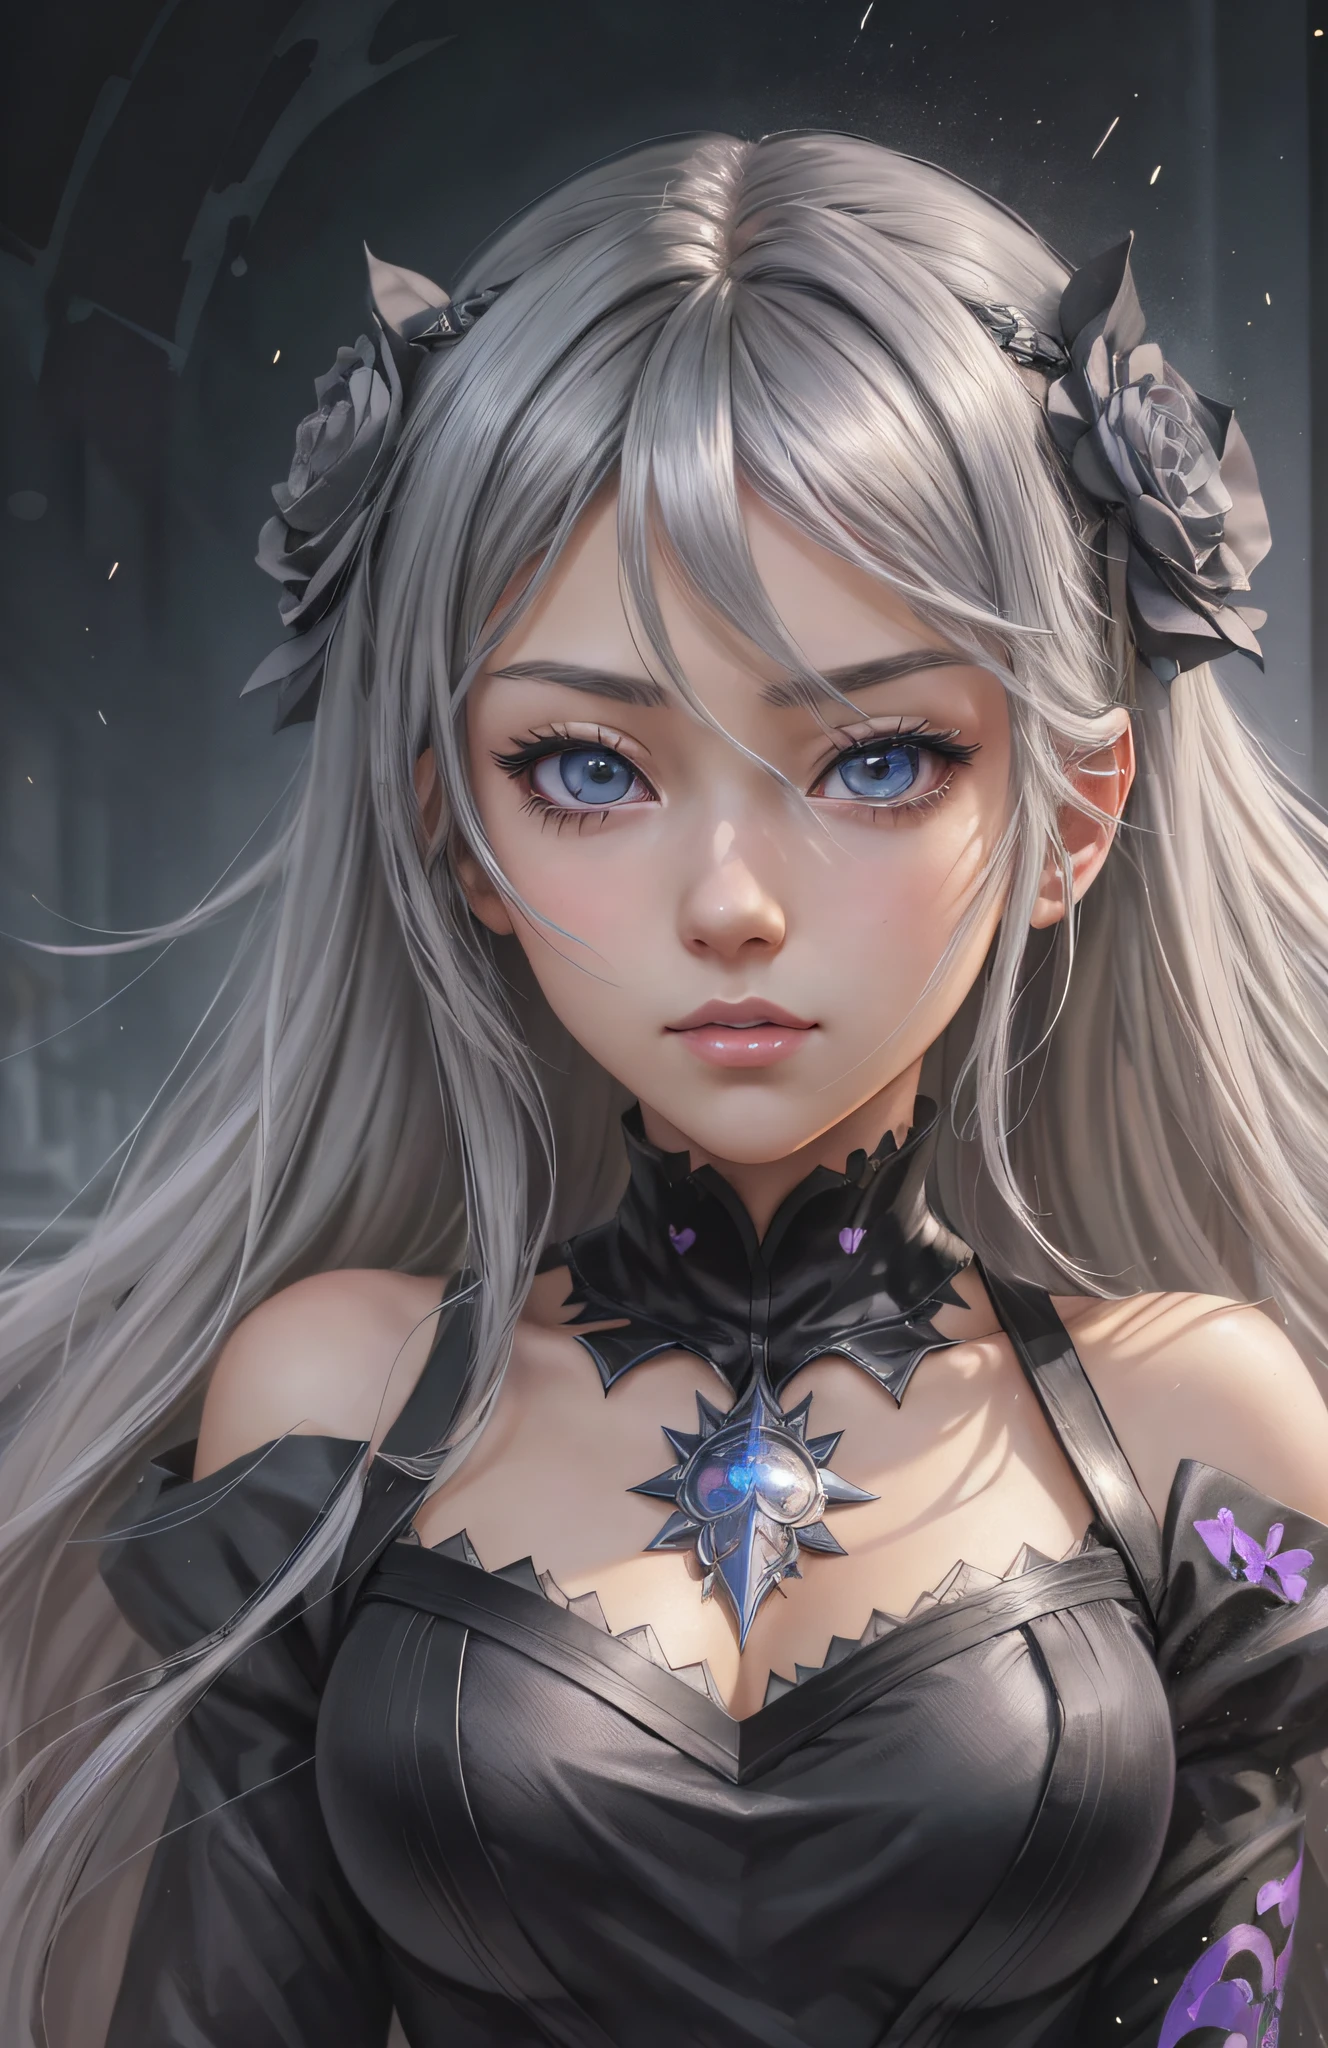 ((masterpiece, best quality)), anime girl with long gray hair and black  dress, detailed portrait of anime girl, detailed digital anime art, stunning anime face portrait, detailed anime art, portrait knights of zodiac girl, digital anime illustration, beautiful anime portrait, detailed anime soft face, detailed anime artwork, soft anime illustration, clean detailed anime art, 8k high quality detailed art